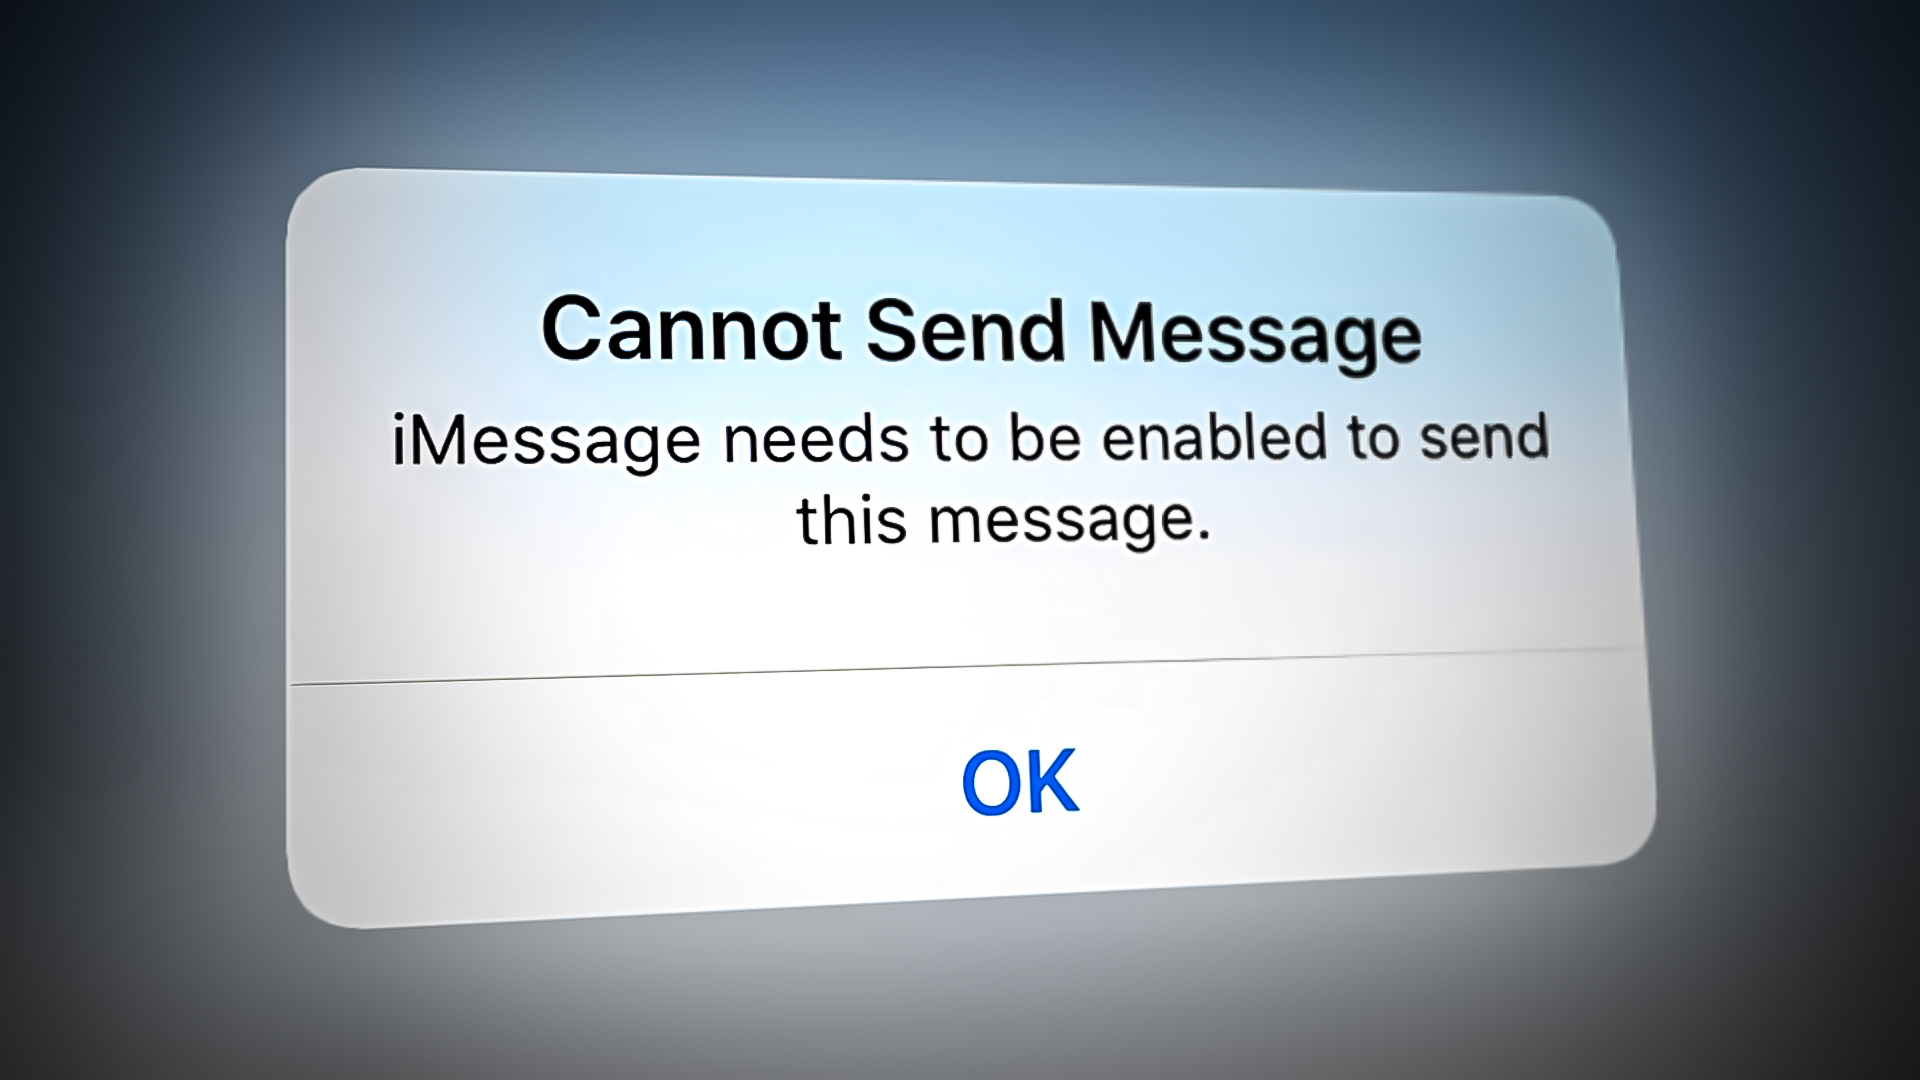 iMessage needs to be enabled to send this message